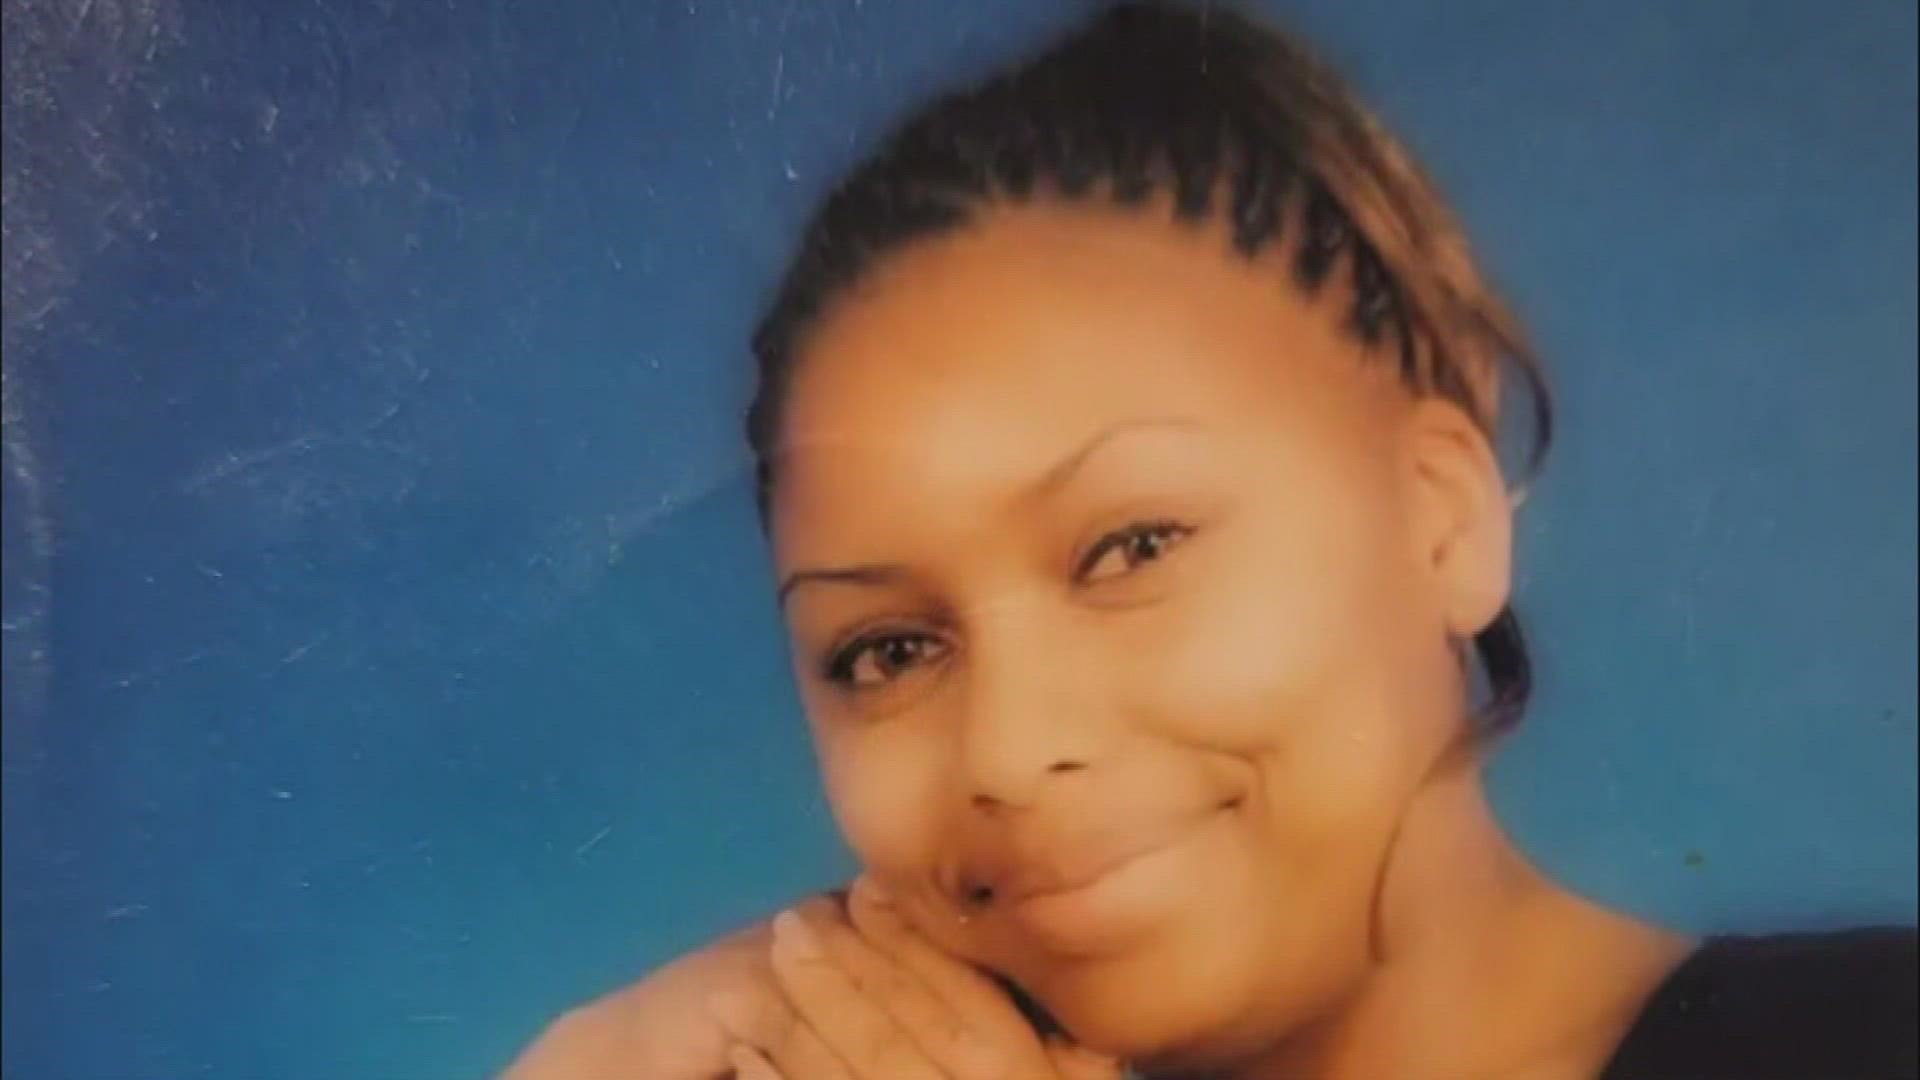 The death of Syretta Brown, a 35-year-old woman whose body was found inside a tent at a Tacoma homeless encampment in November, is being investigated as a homicide.